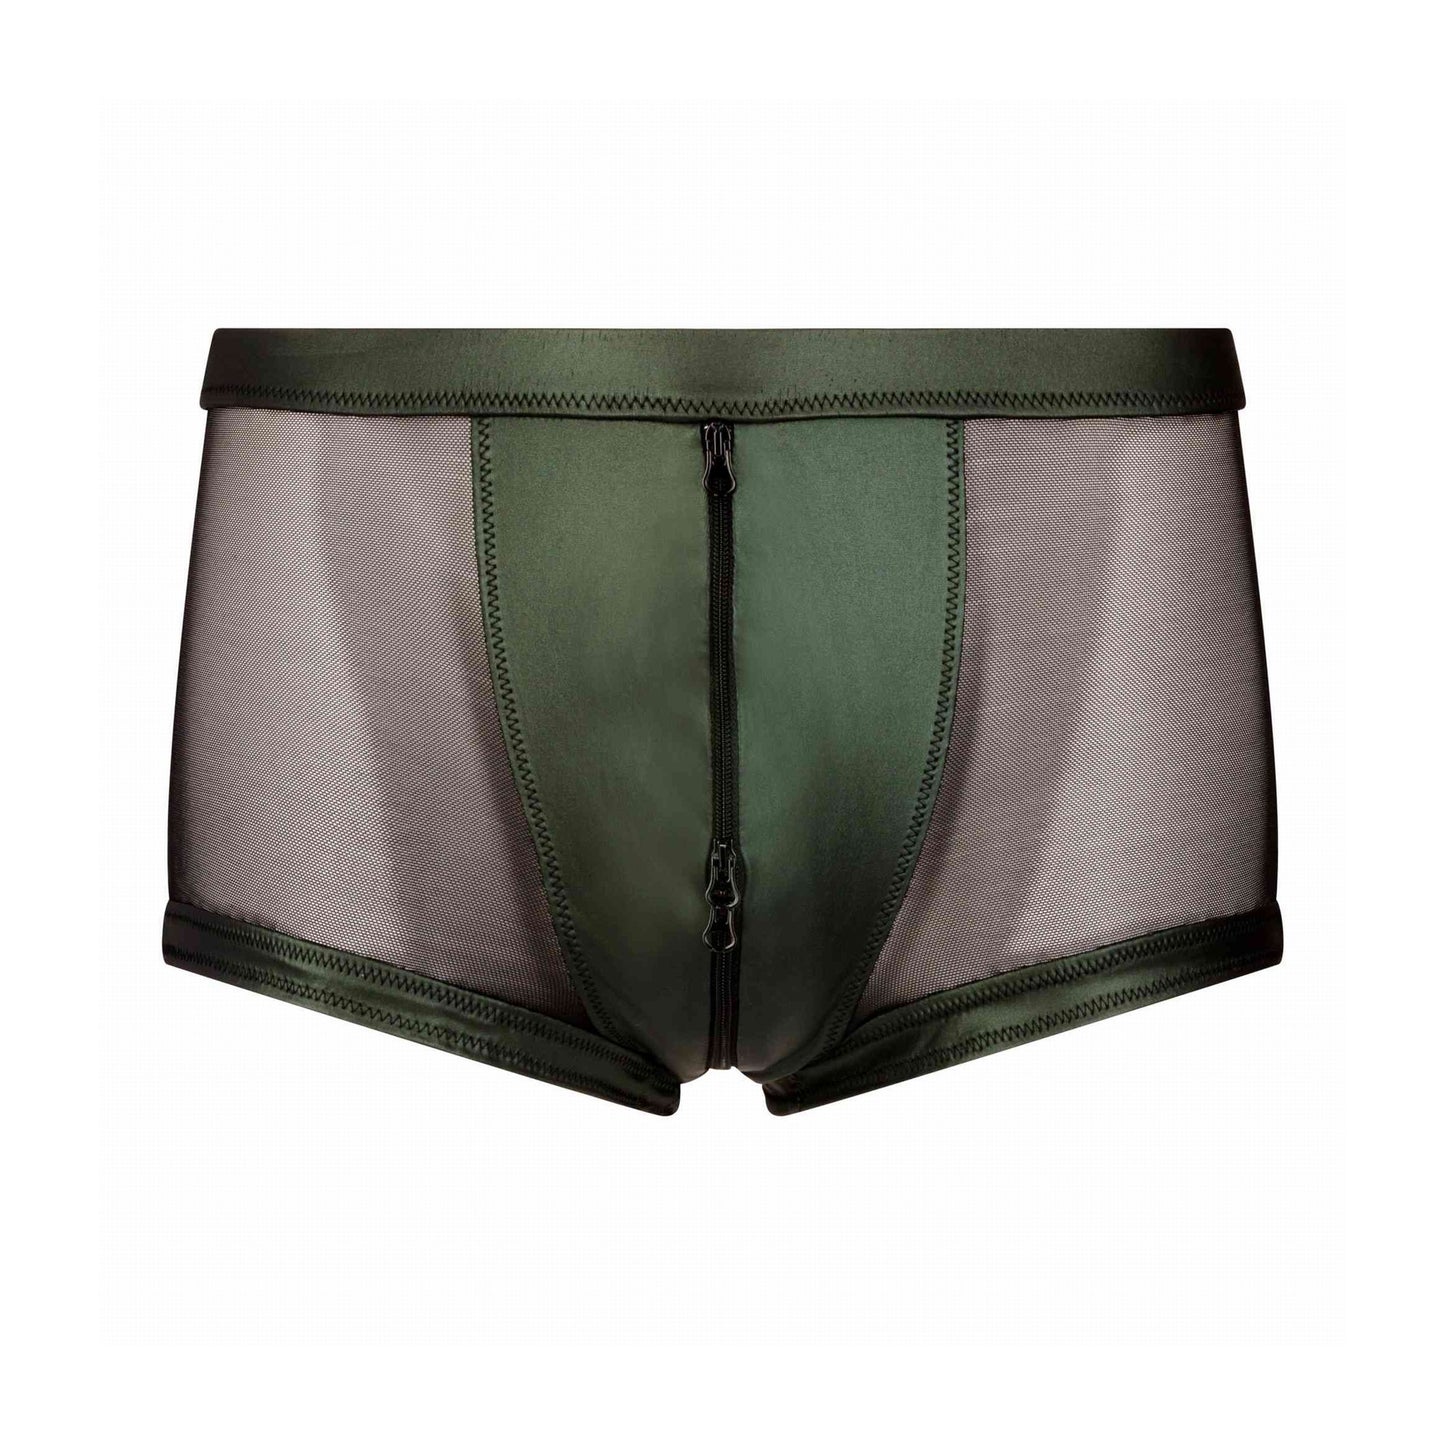 The front of the Tomana Wetlook & Mesh Boxer Brief.